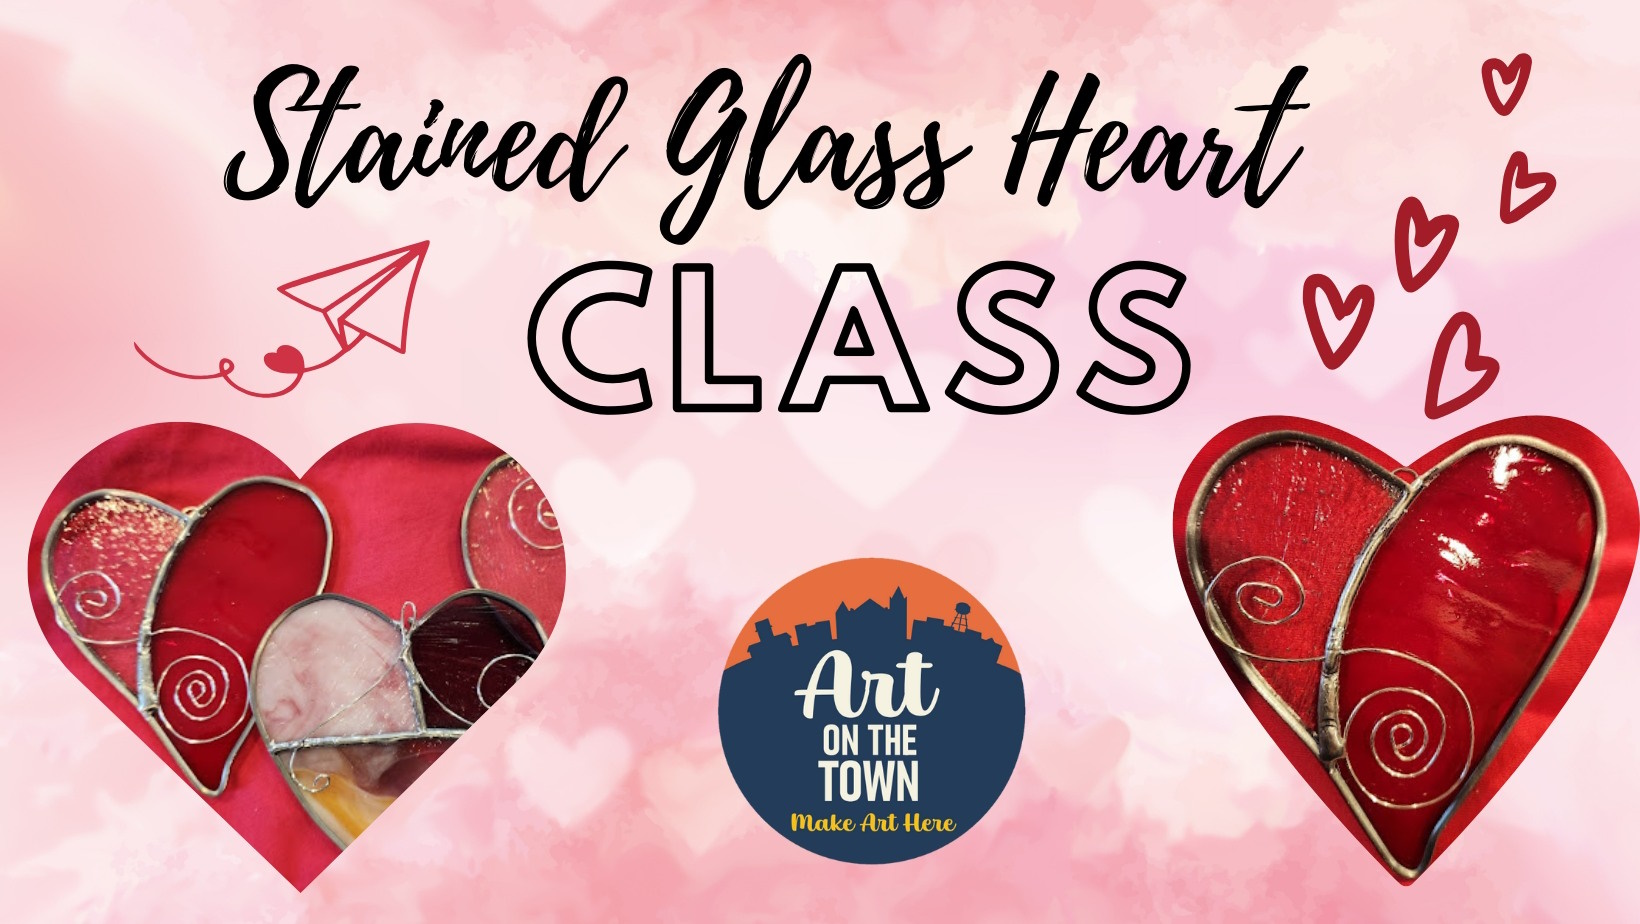 Stained Glass Heart Class